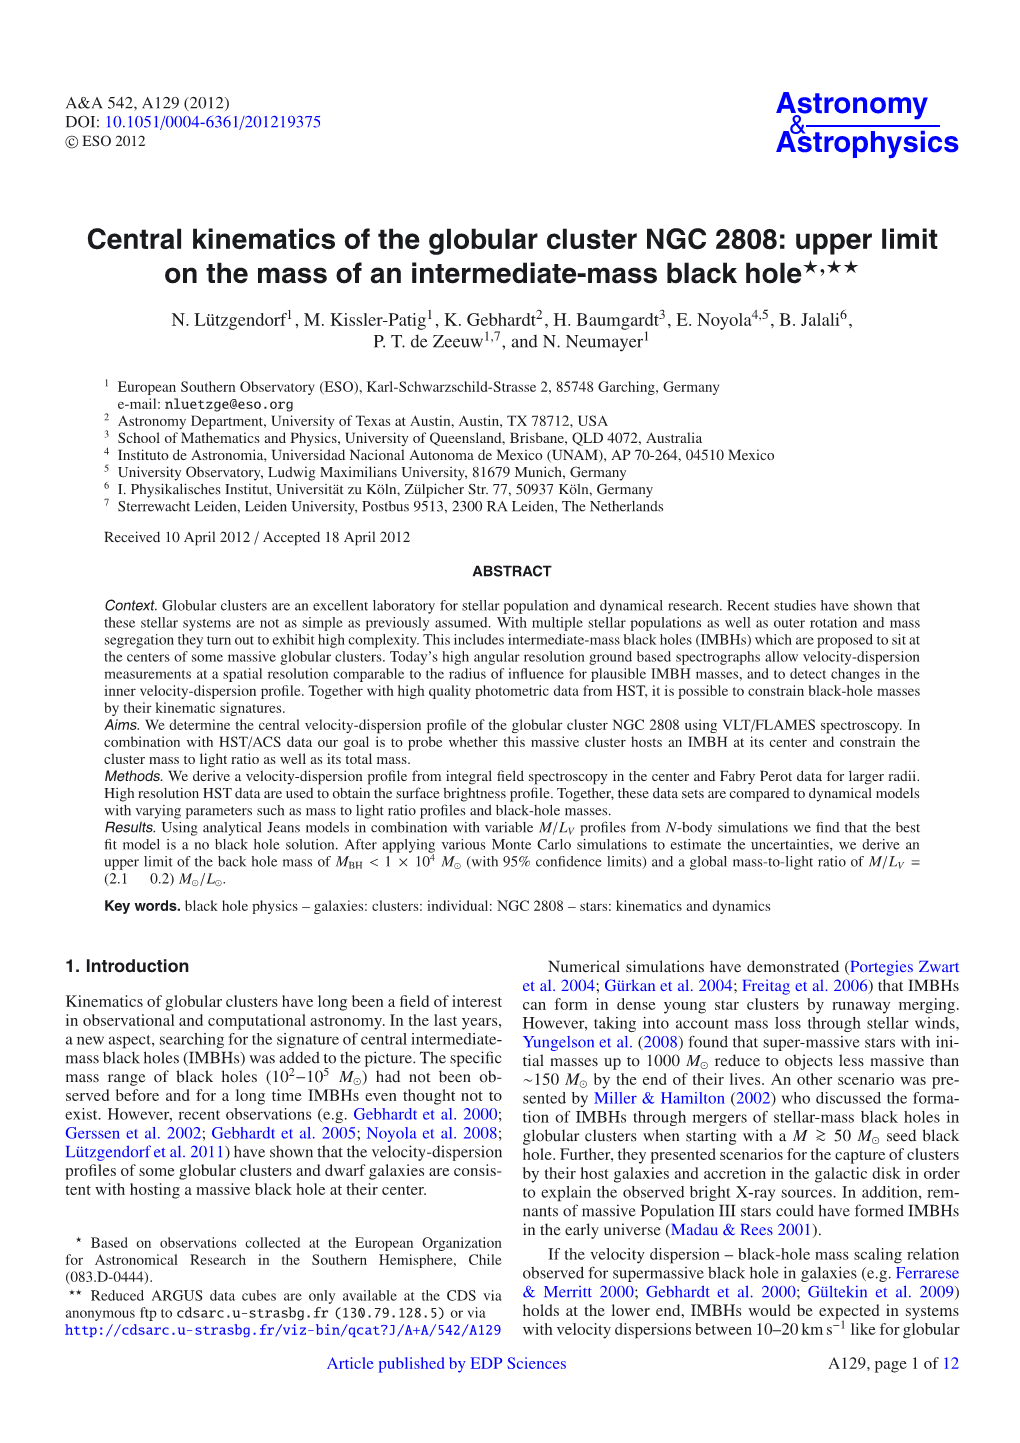 Central Kinematics of the Globular Cluster NGC 2808: Upper Limit on the Mass of an Intermediate-Mass Black Hole�,